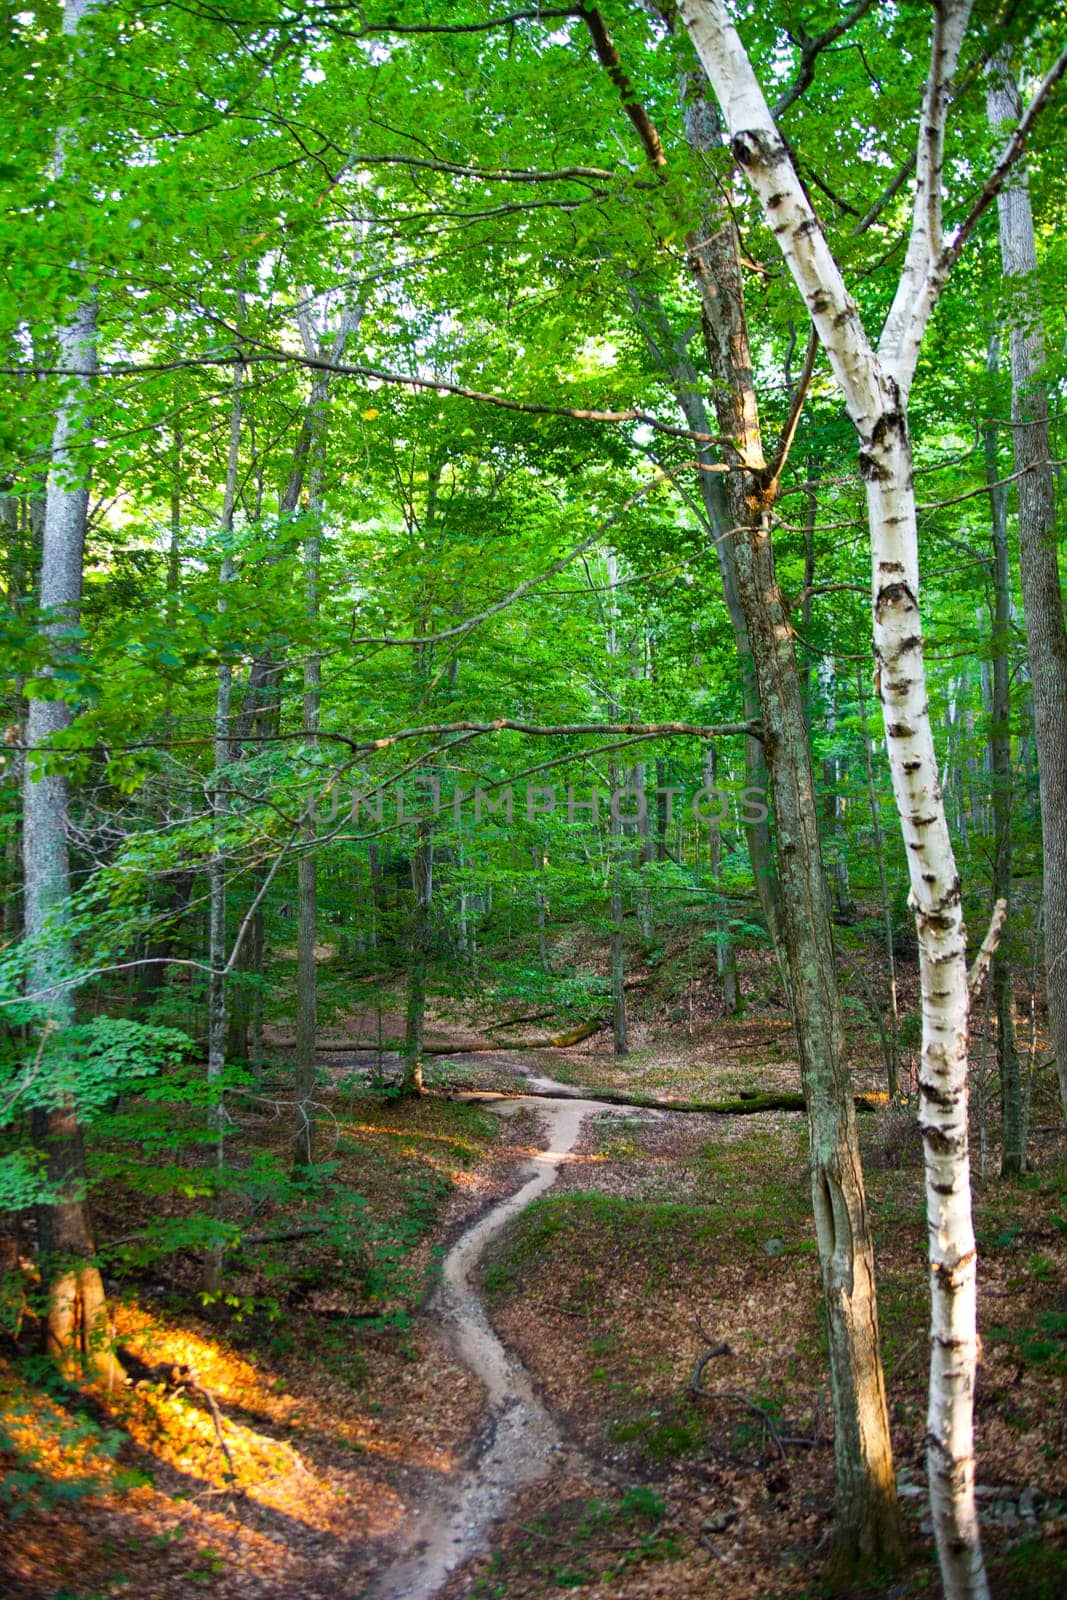 Winding Path Through Vibrant Forest with Striking White Birch Tree by njproductions